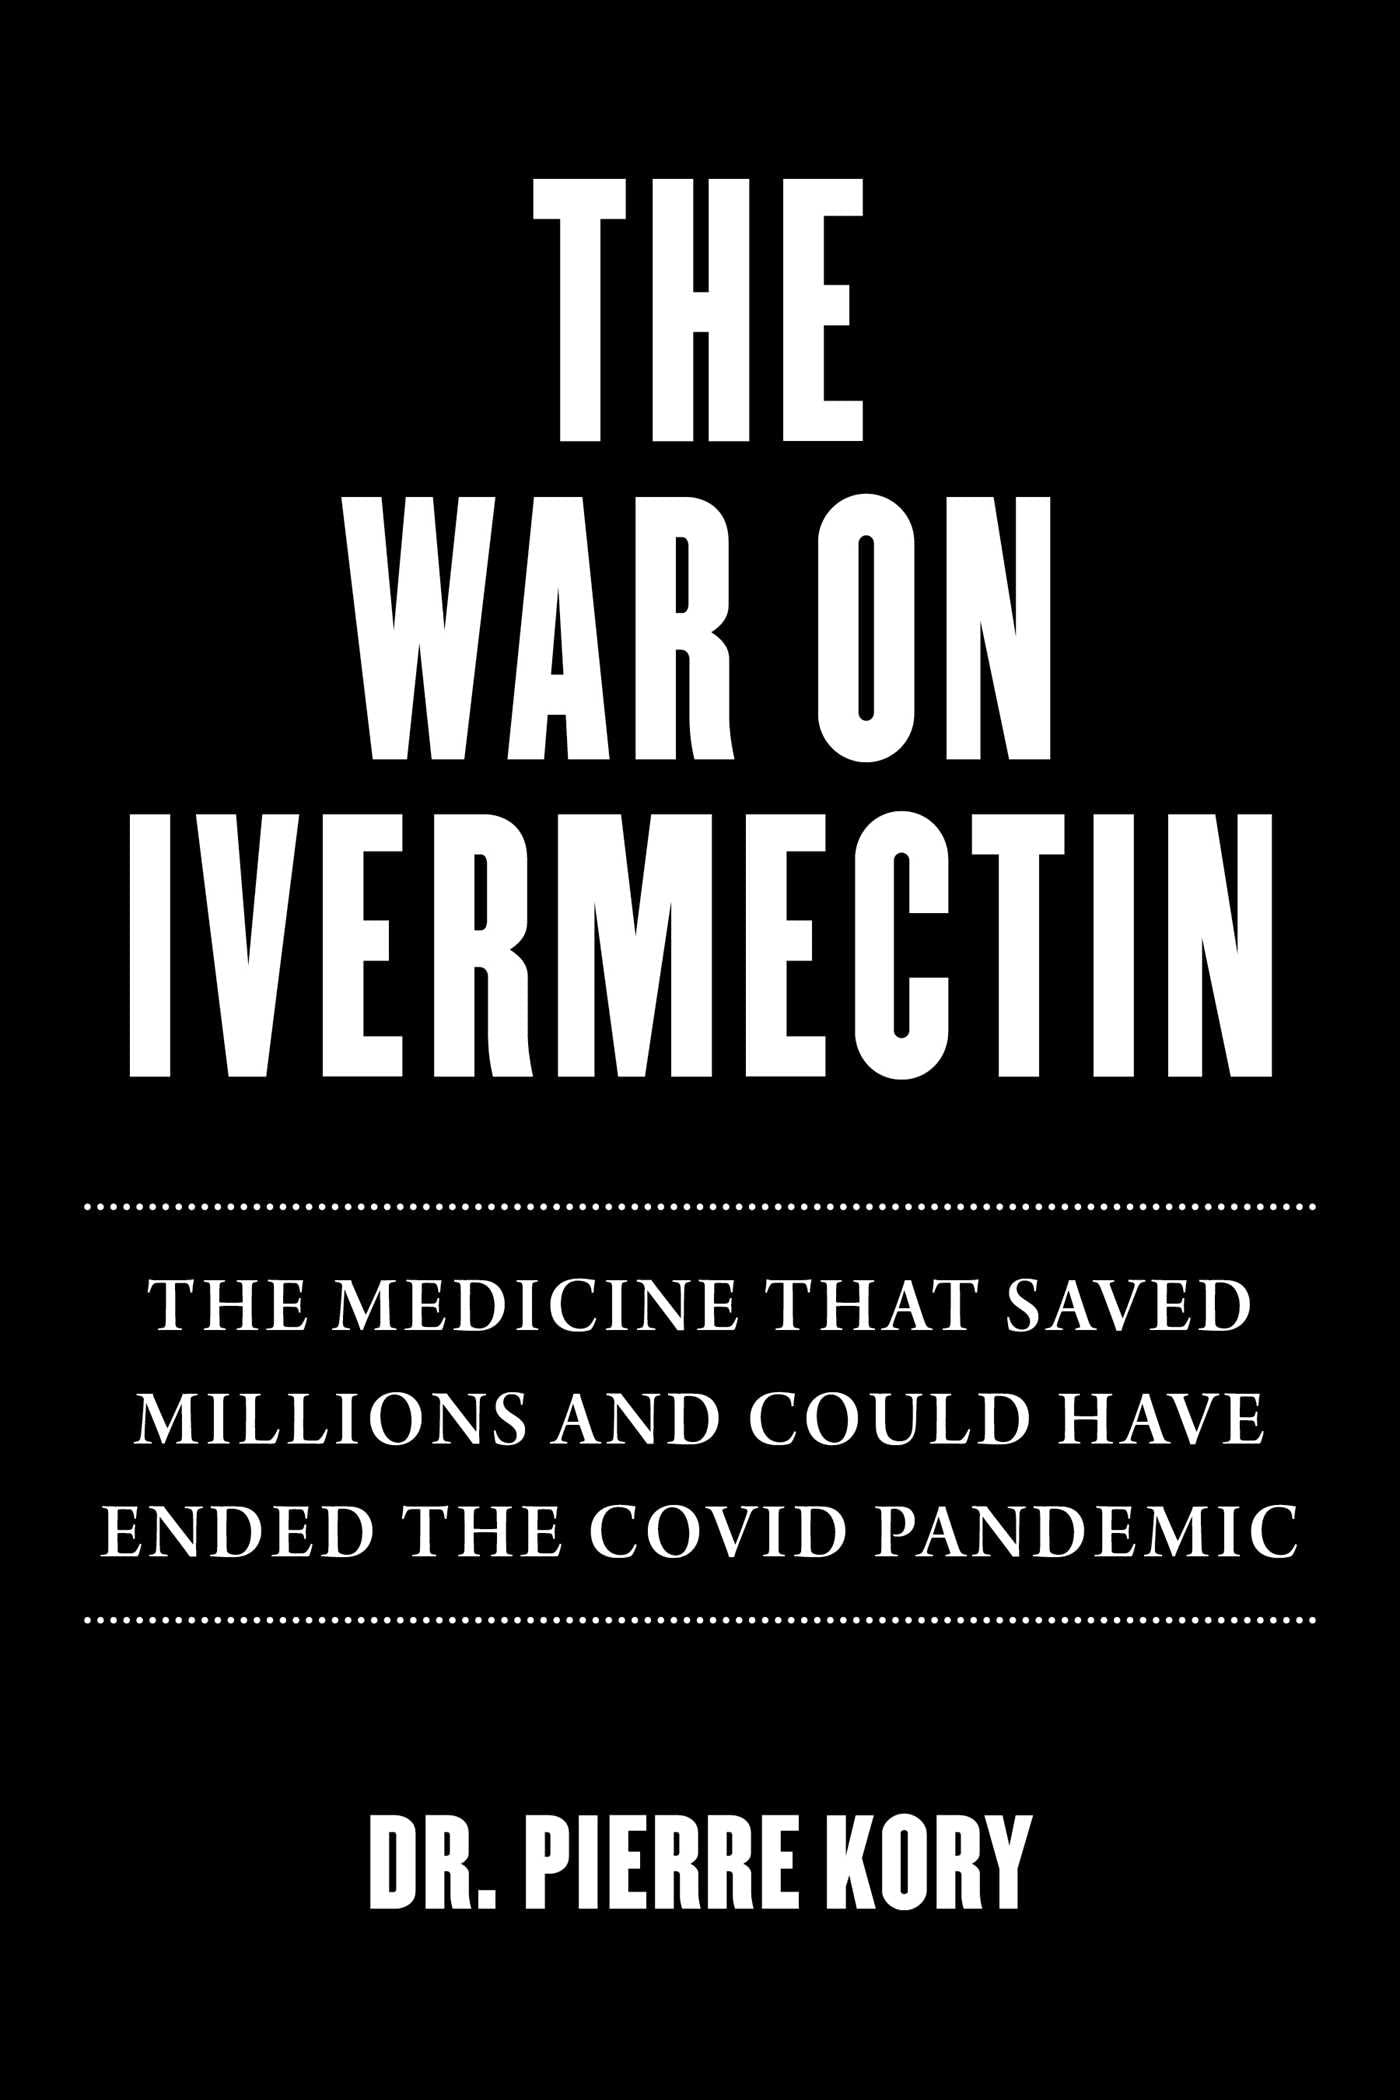 War on Ivermectin: The Medicine that Saved Millions and Could Have Ended the COVID Pandemic